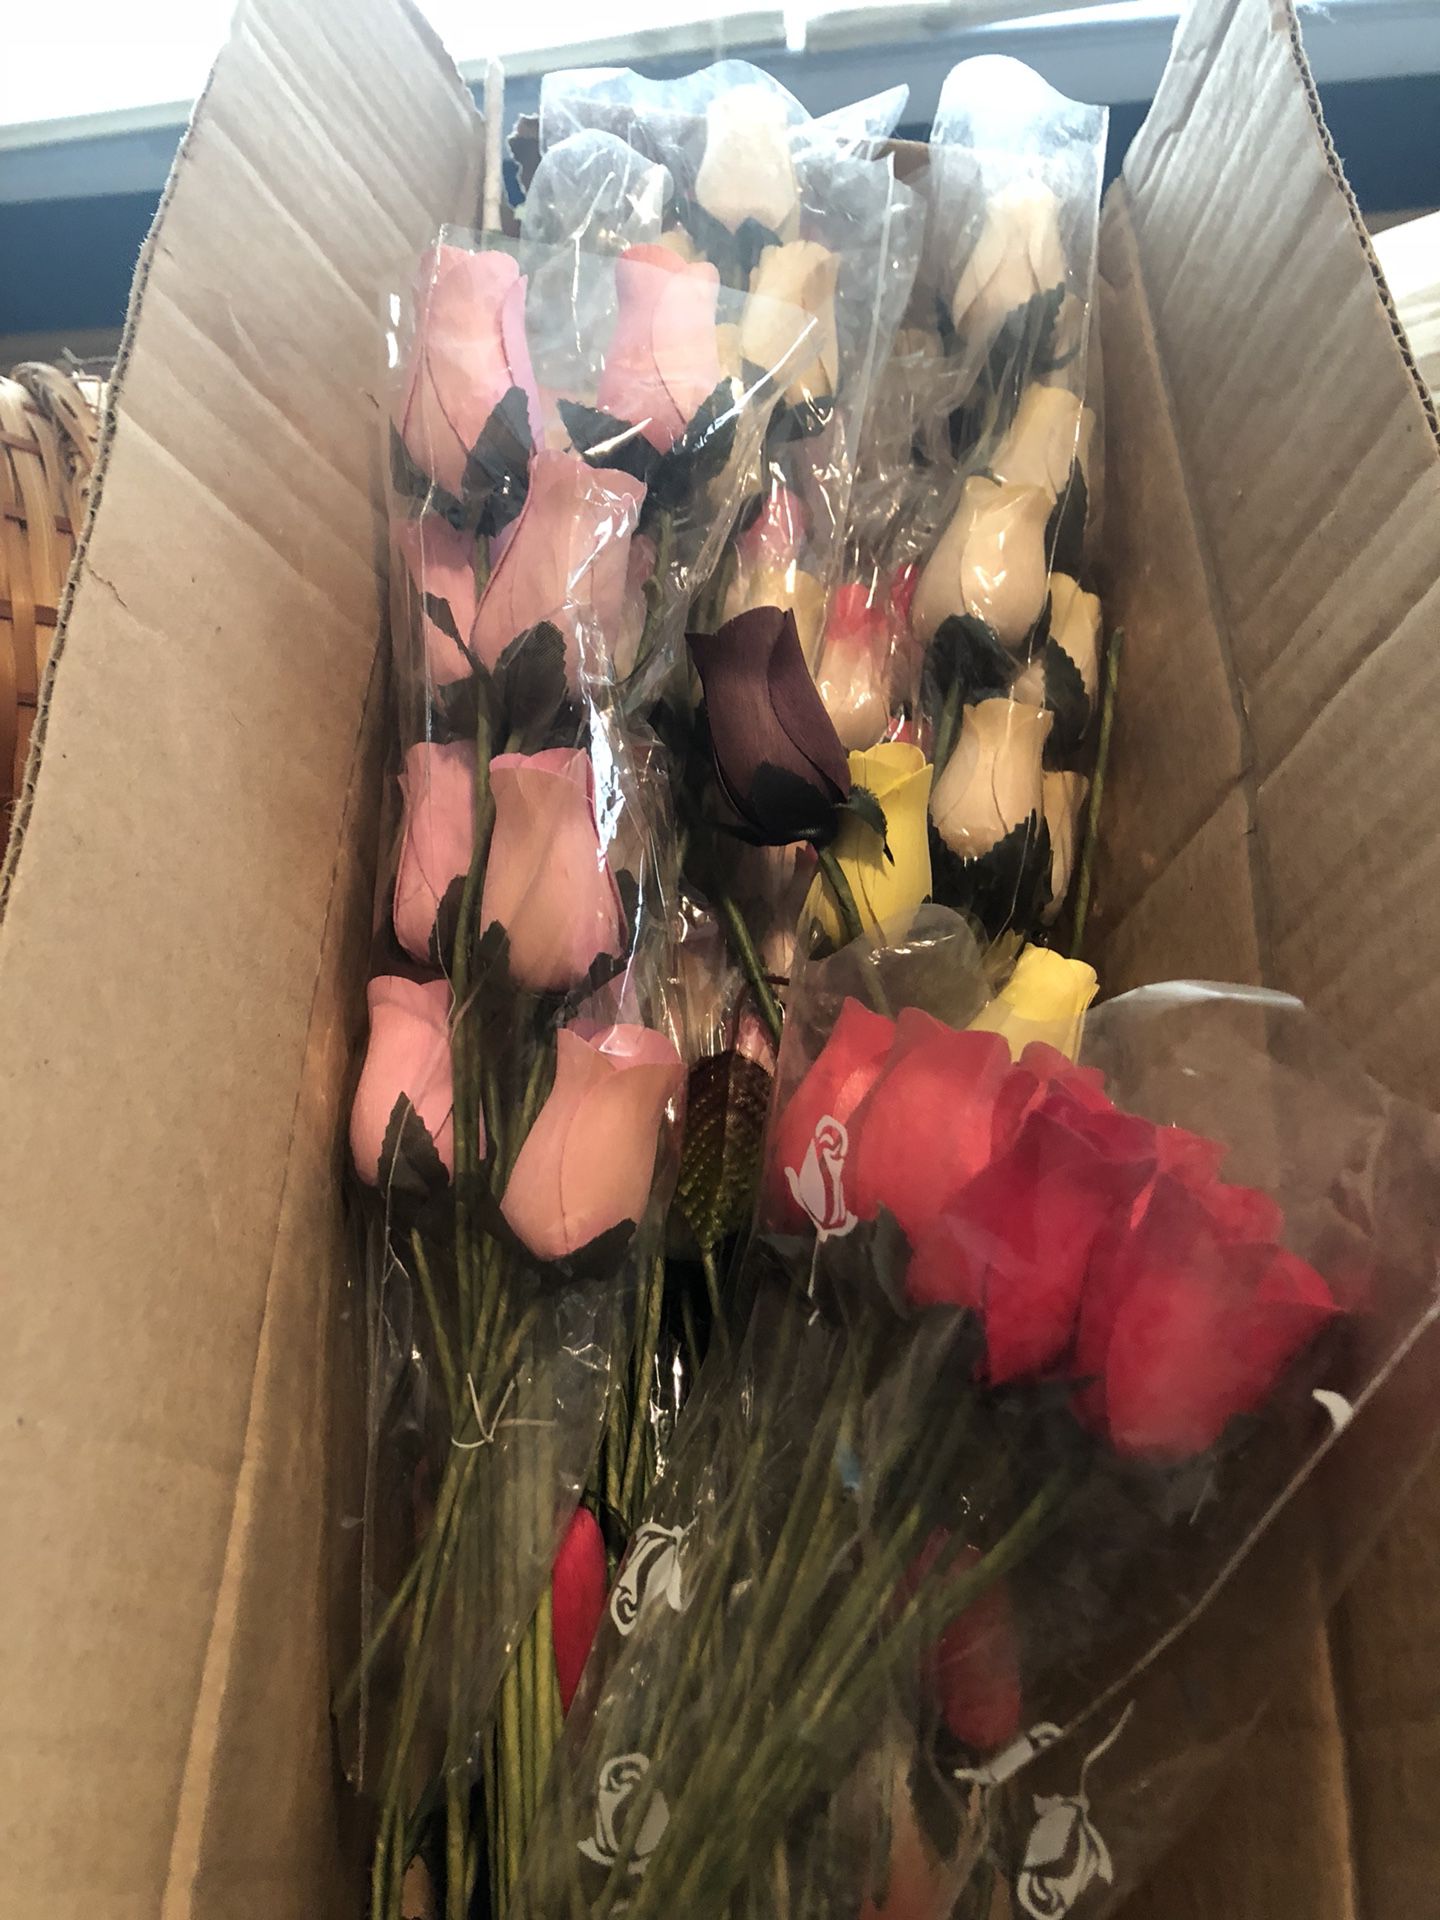 Thousands Of Wooden Roses & Supplies